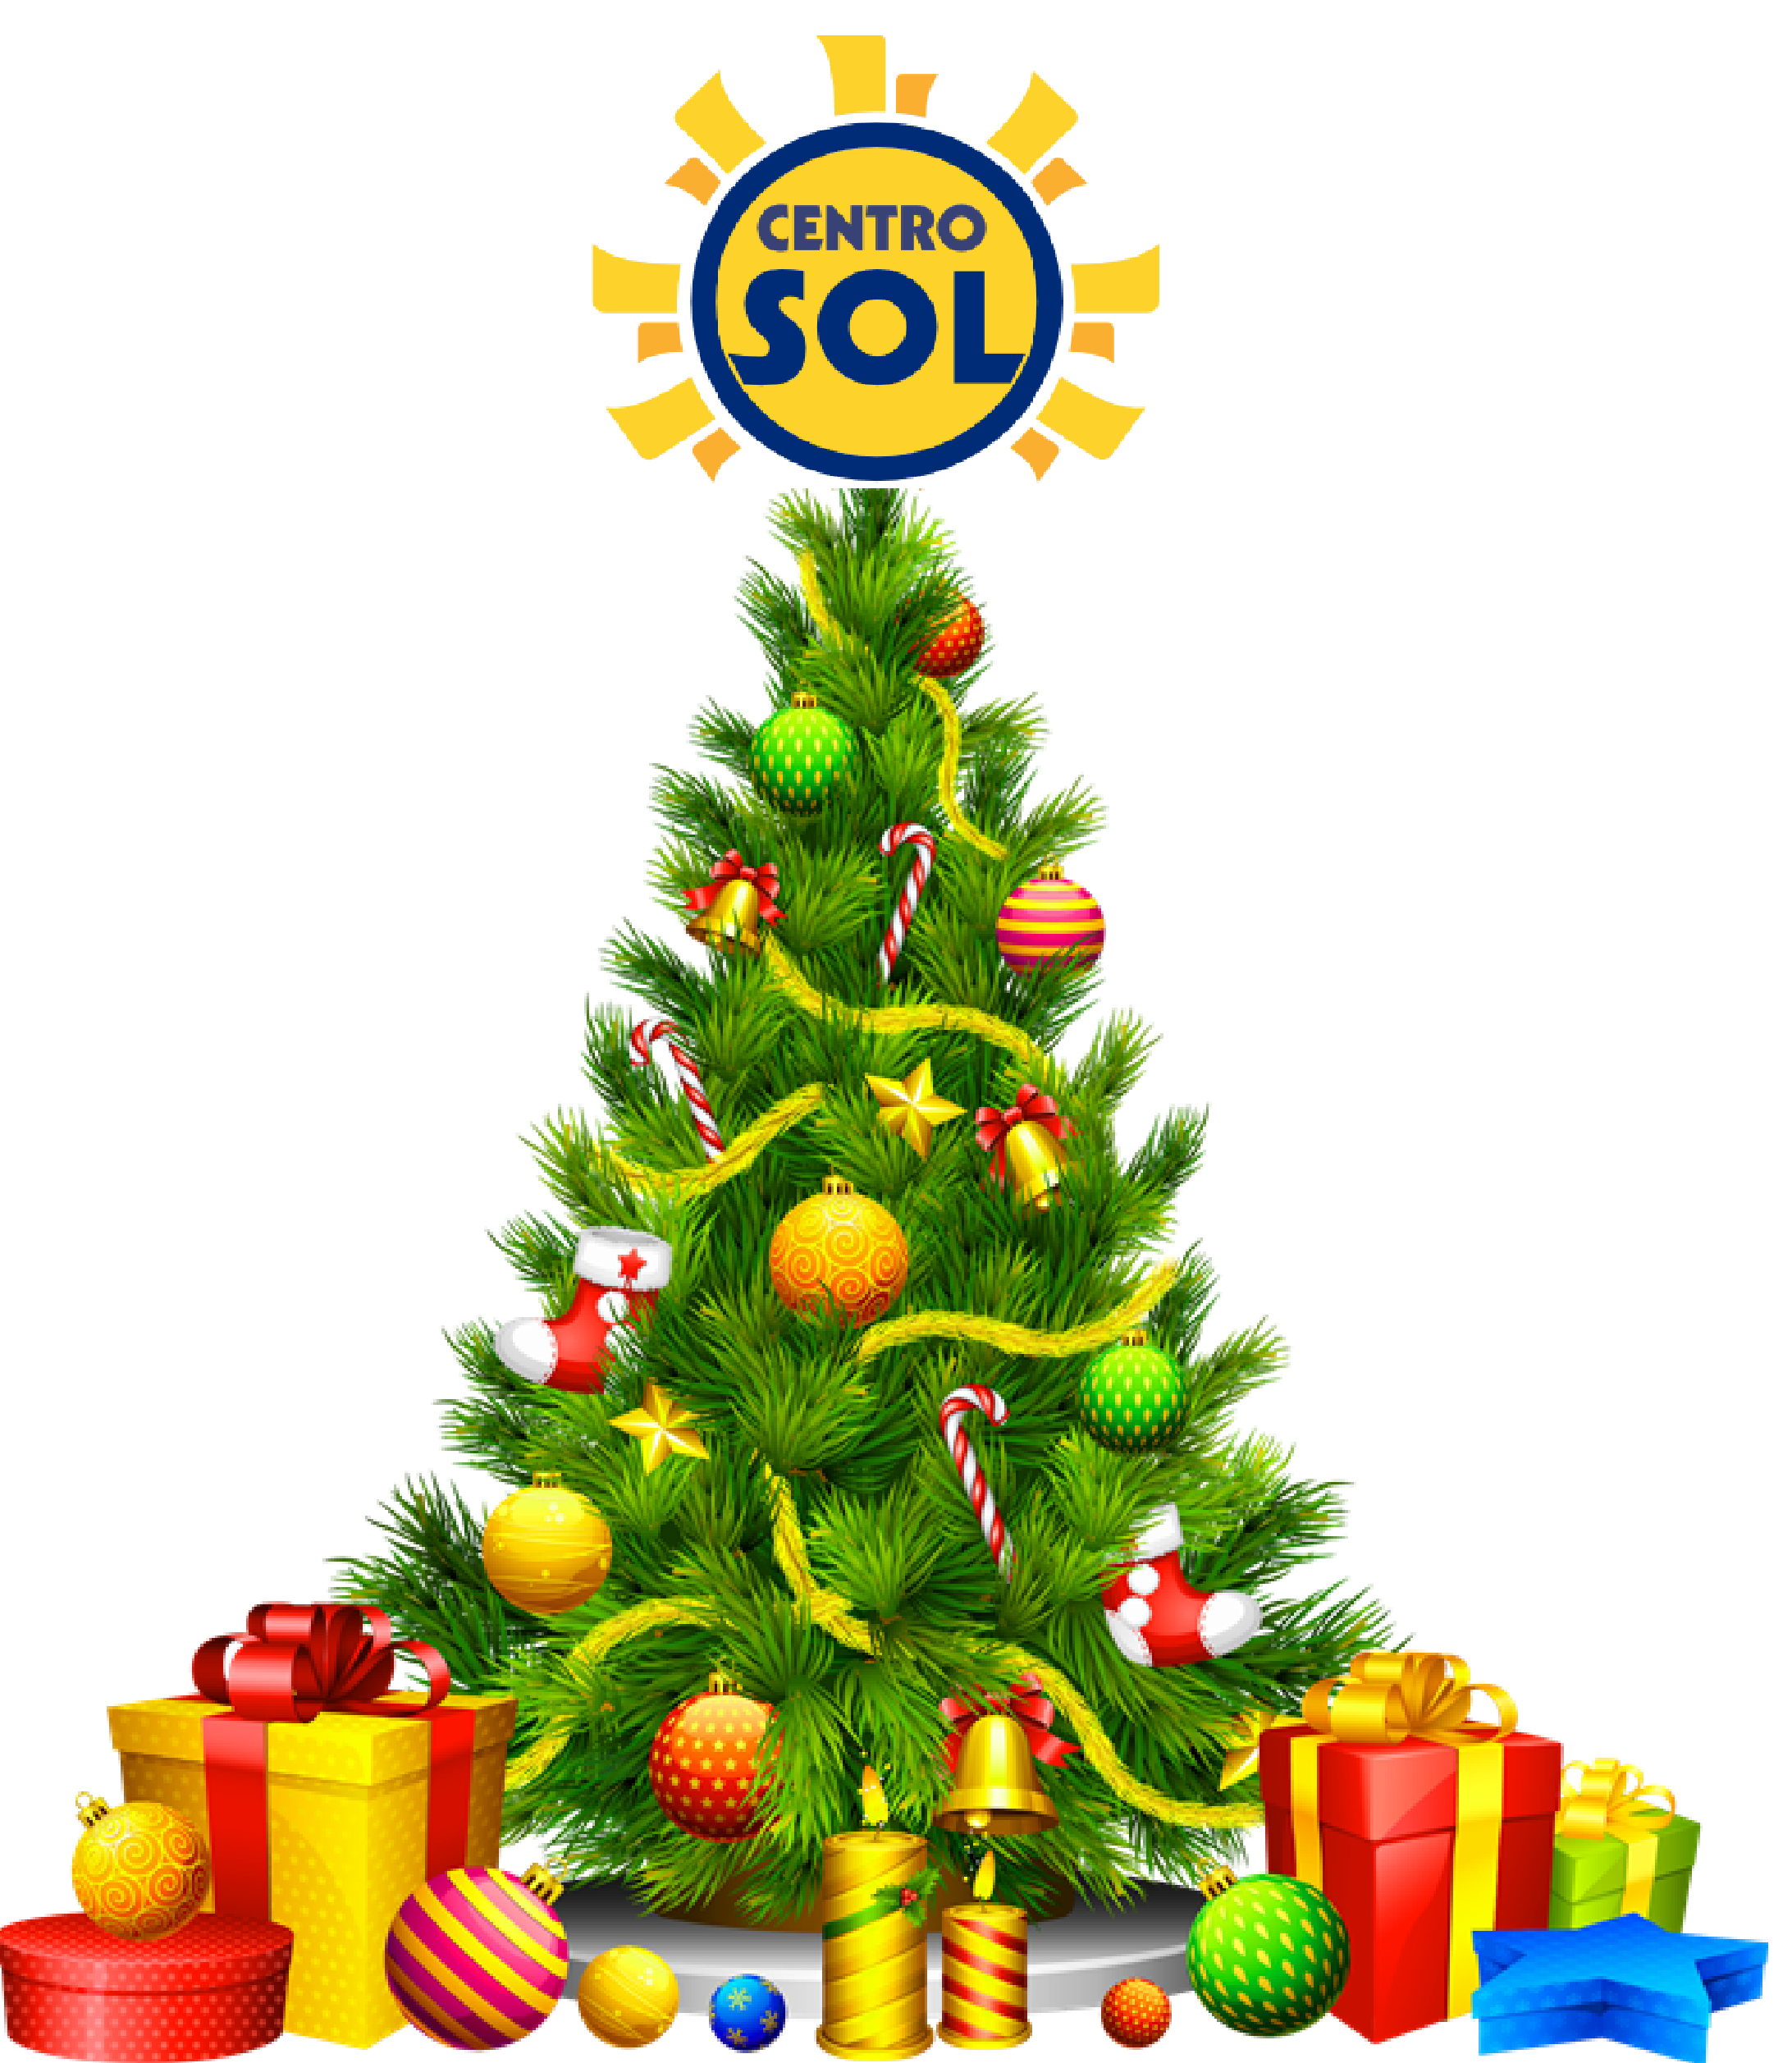 Centro-SOL-tree-2.png